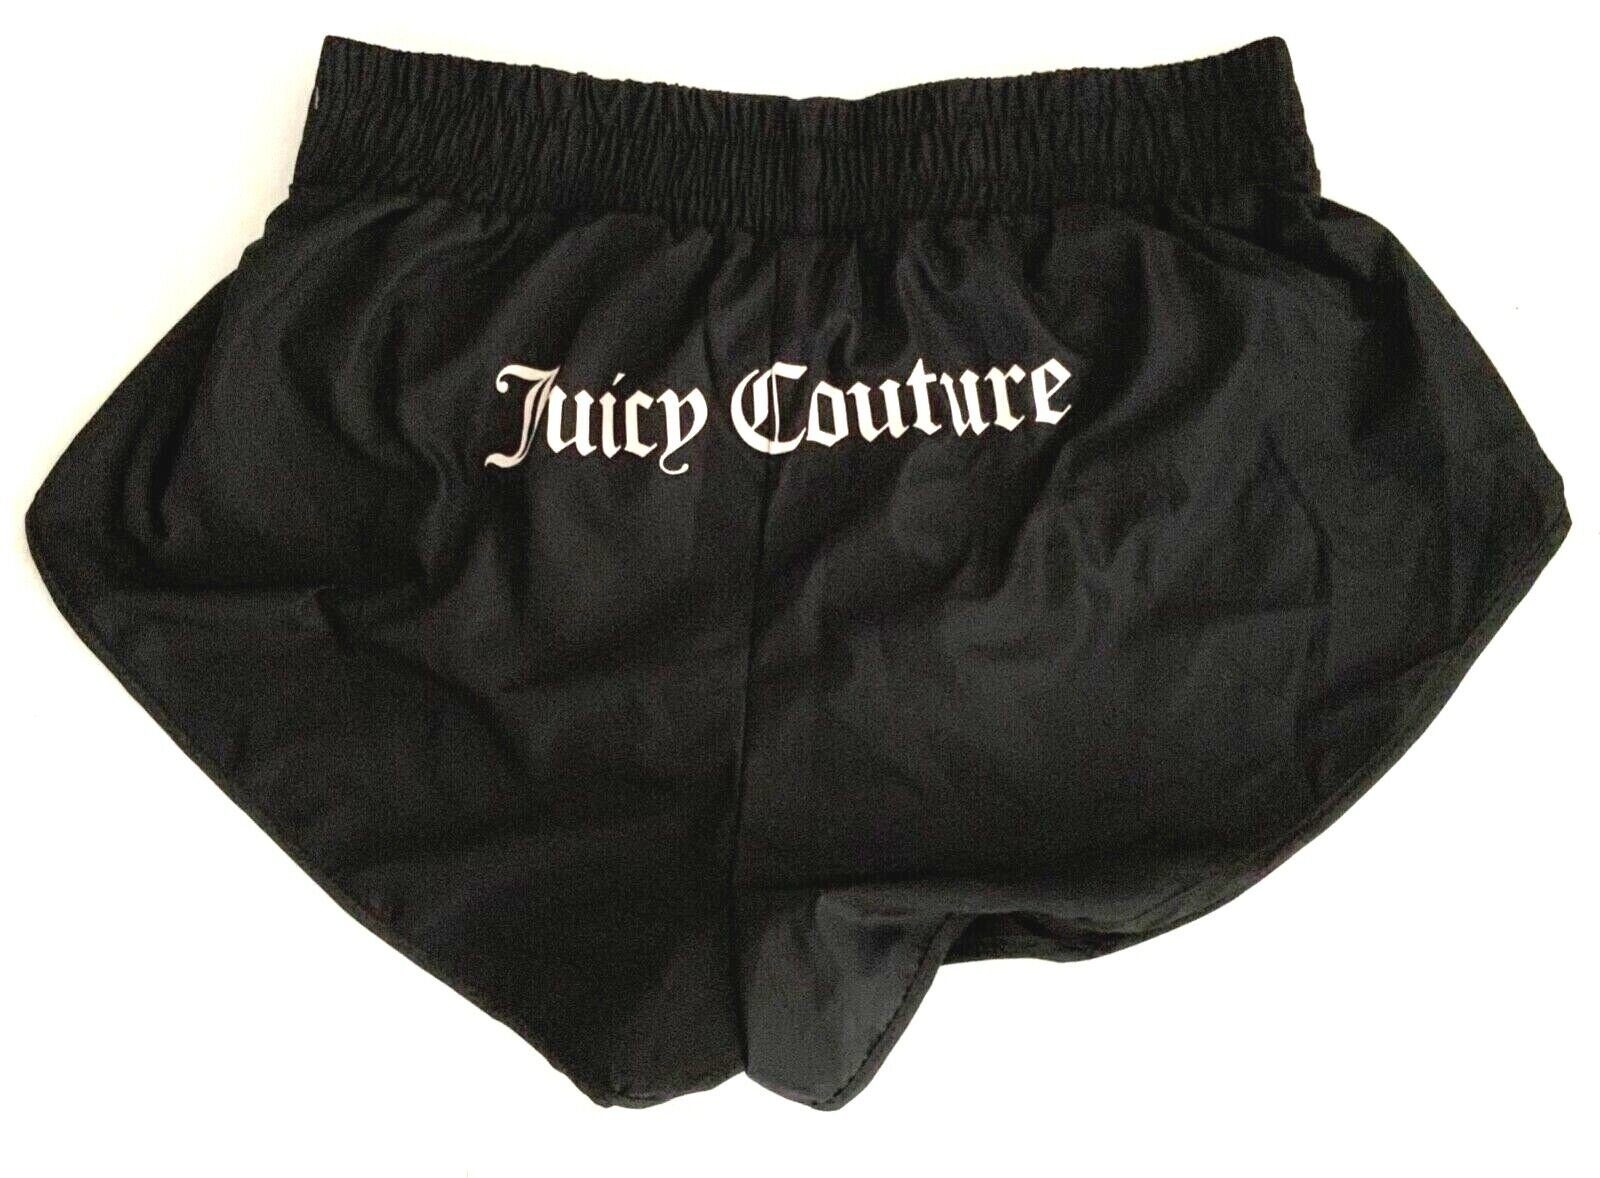 TK Juicy Couture Shorts Run Couture Juicy Laufshorts Damen Couture JAZMINE Juicy Shorts,